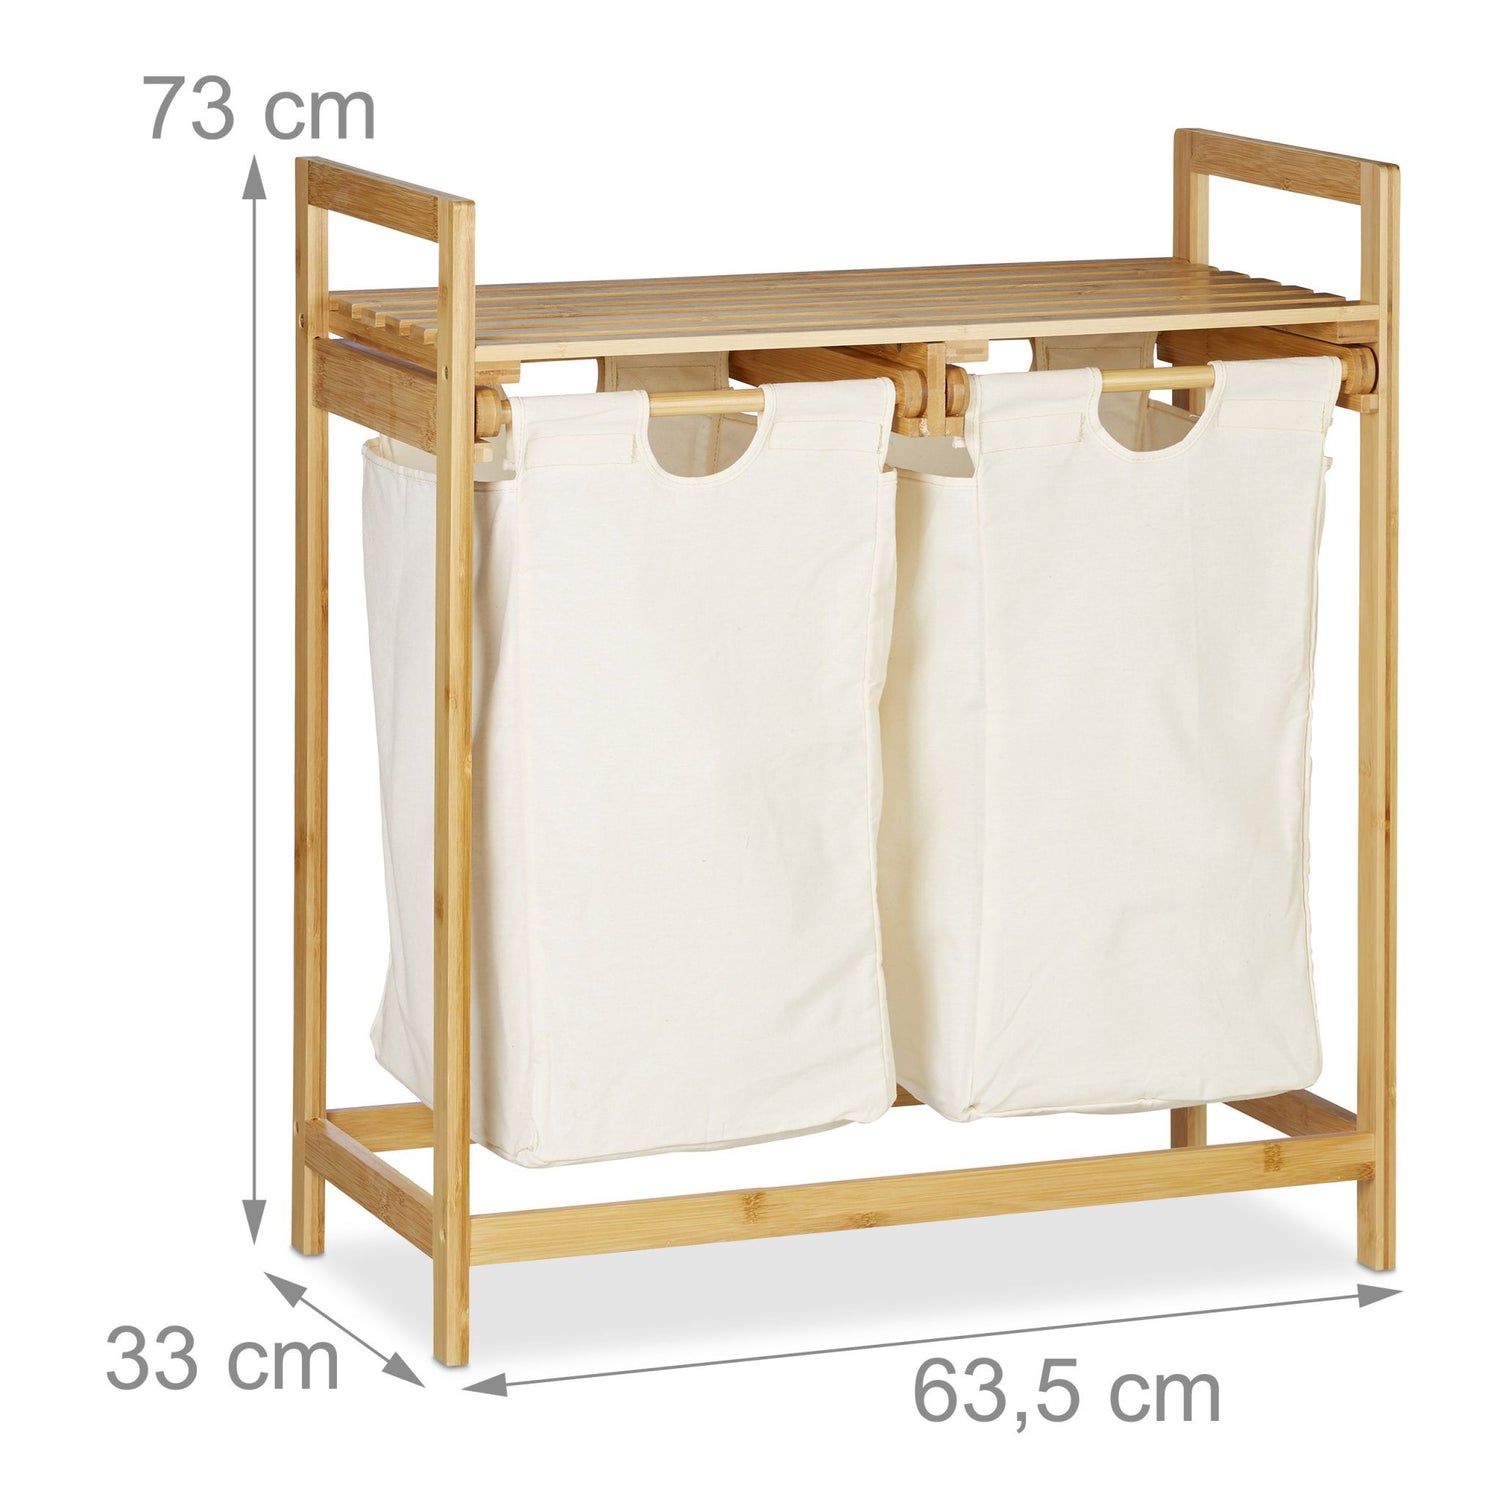 RelaxDays 2-Compartment Bamboo Laundry Hamper Bamboo Bathrooms